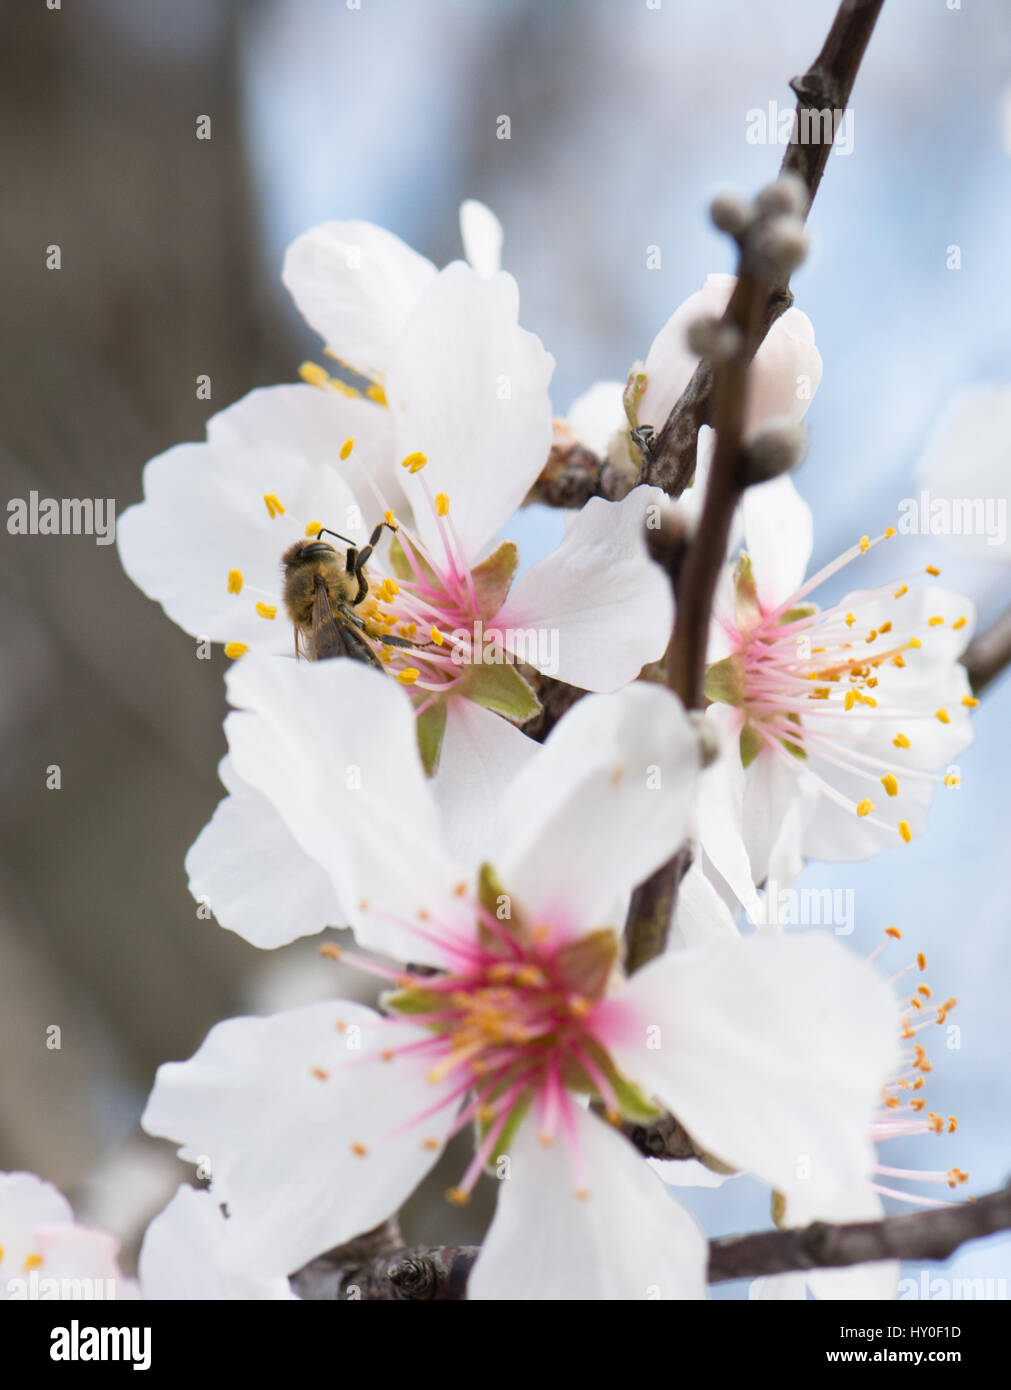 Blossom of the almond tree Stock Photo